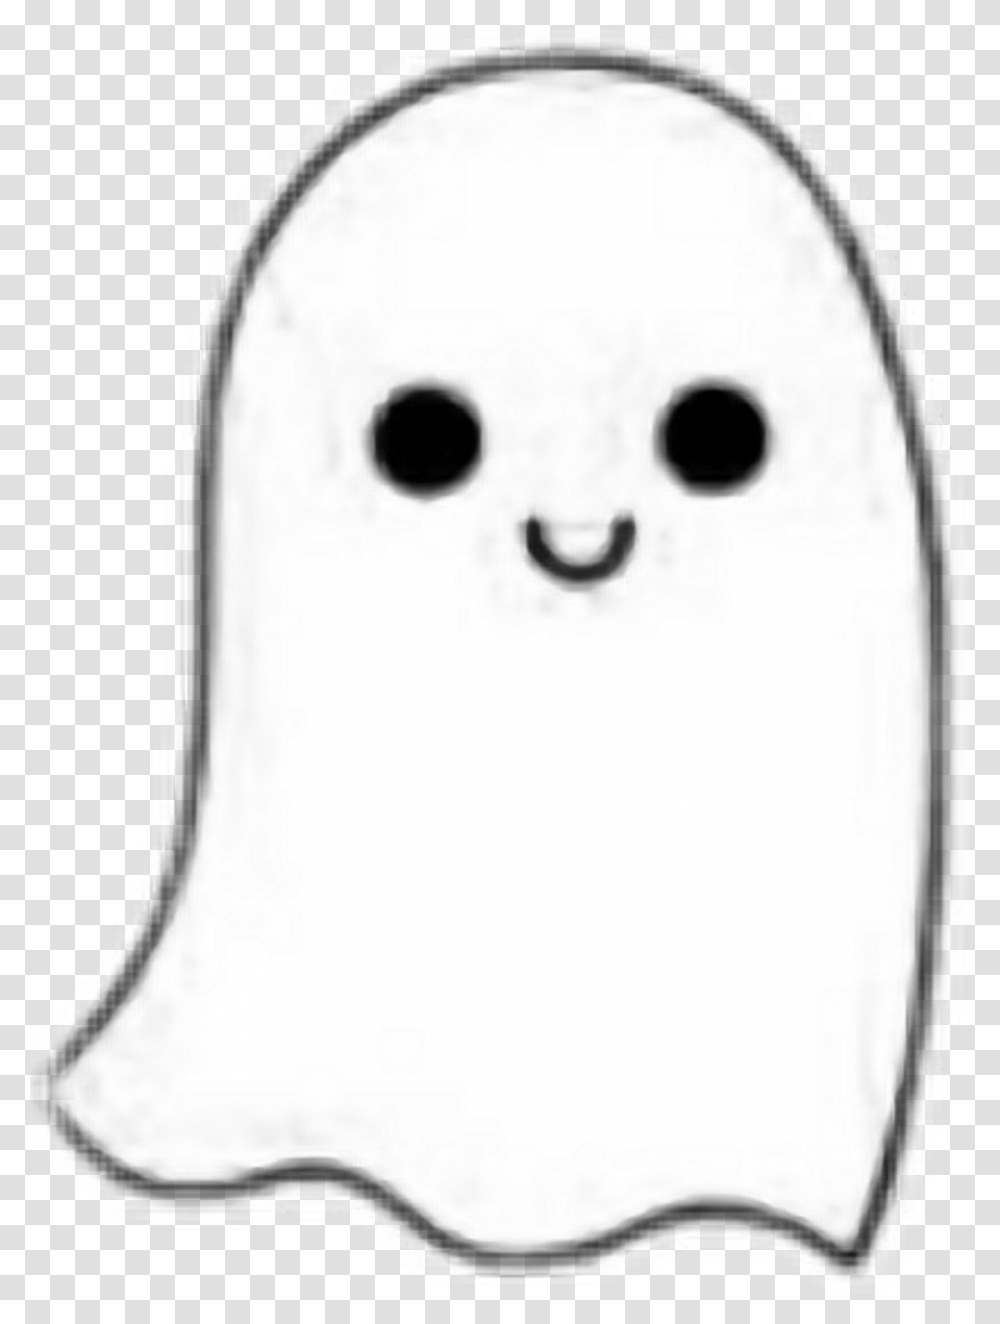 White Ghost Cute Kawaii Black Halloween Aesthetic Cute Images Stickers Black And White, Giant Panda, Bear, Wildlife, Mammal Transparent Png